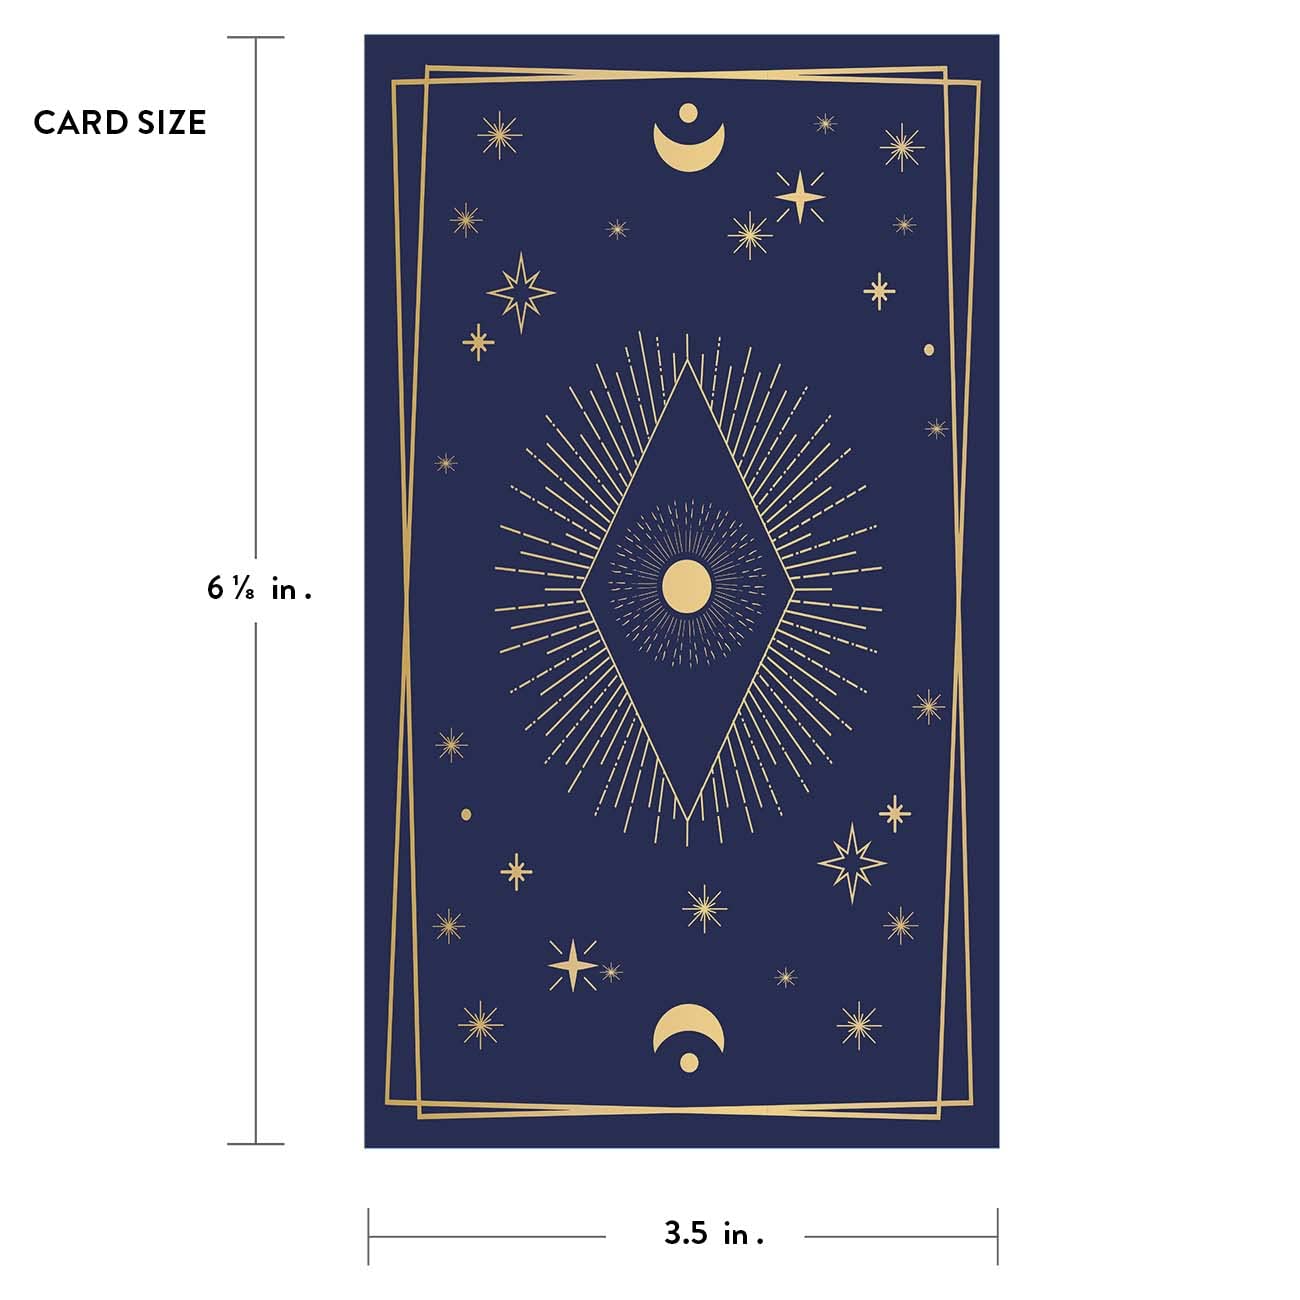 Tarot Deck with Rich Illustrations